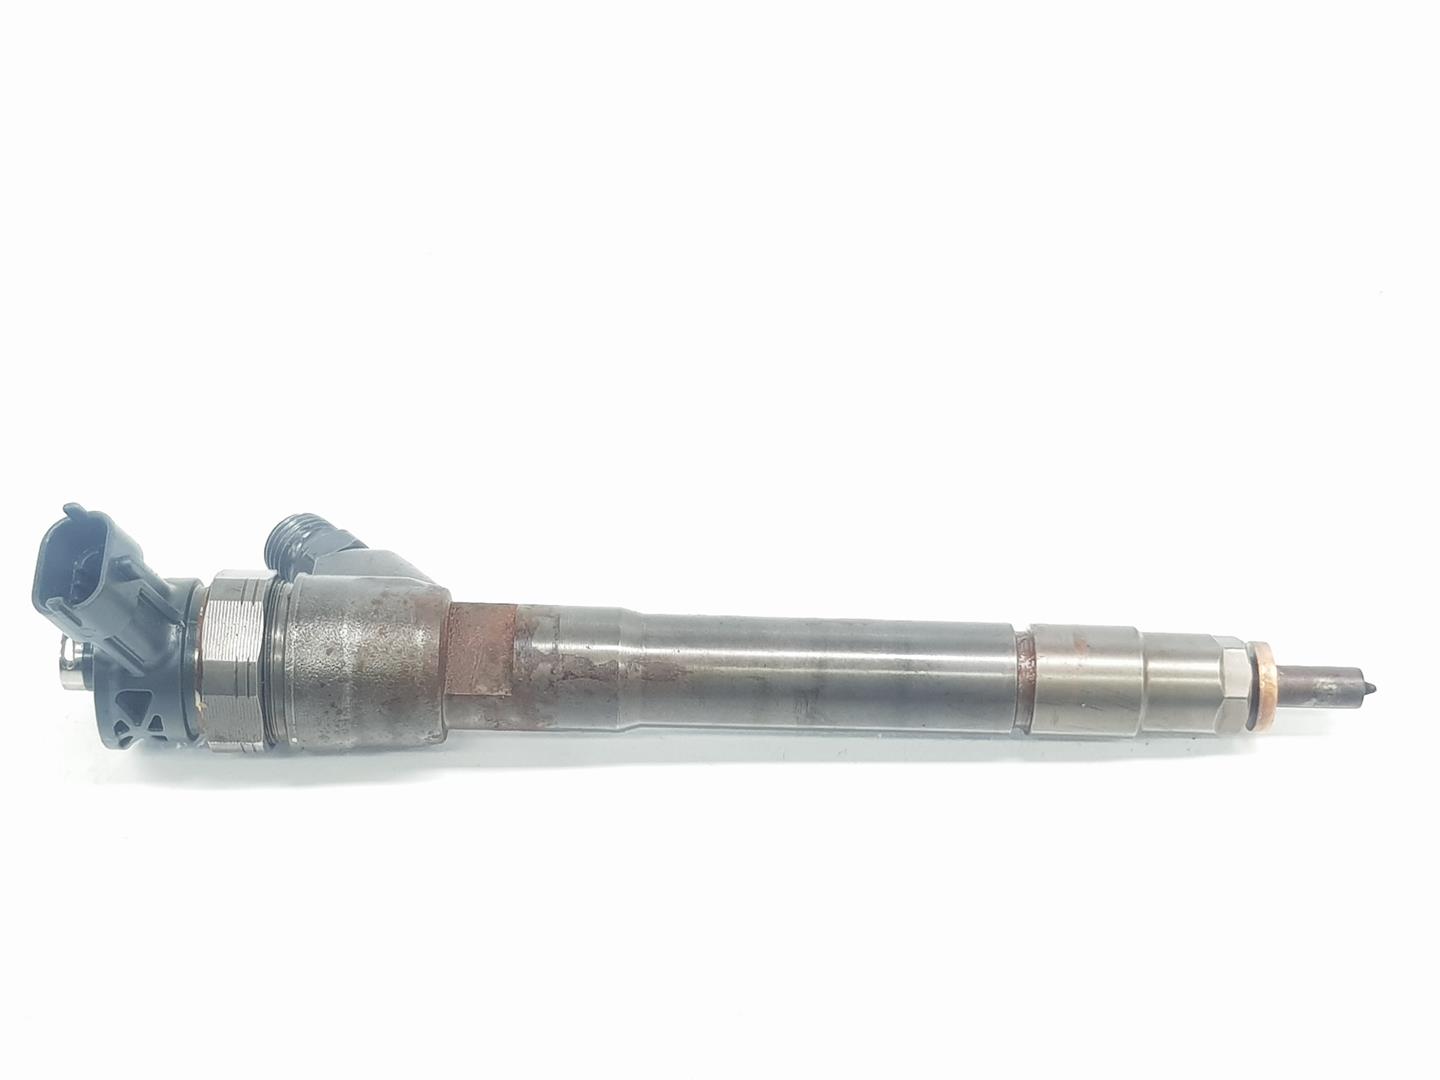 RENAULT Trafic 2 generation (2001-2015) Fuel Injector 166105302R, 166105302R, 1111AA 24224225